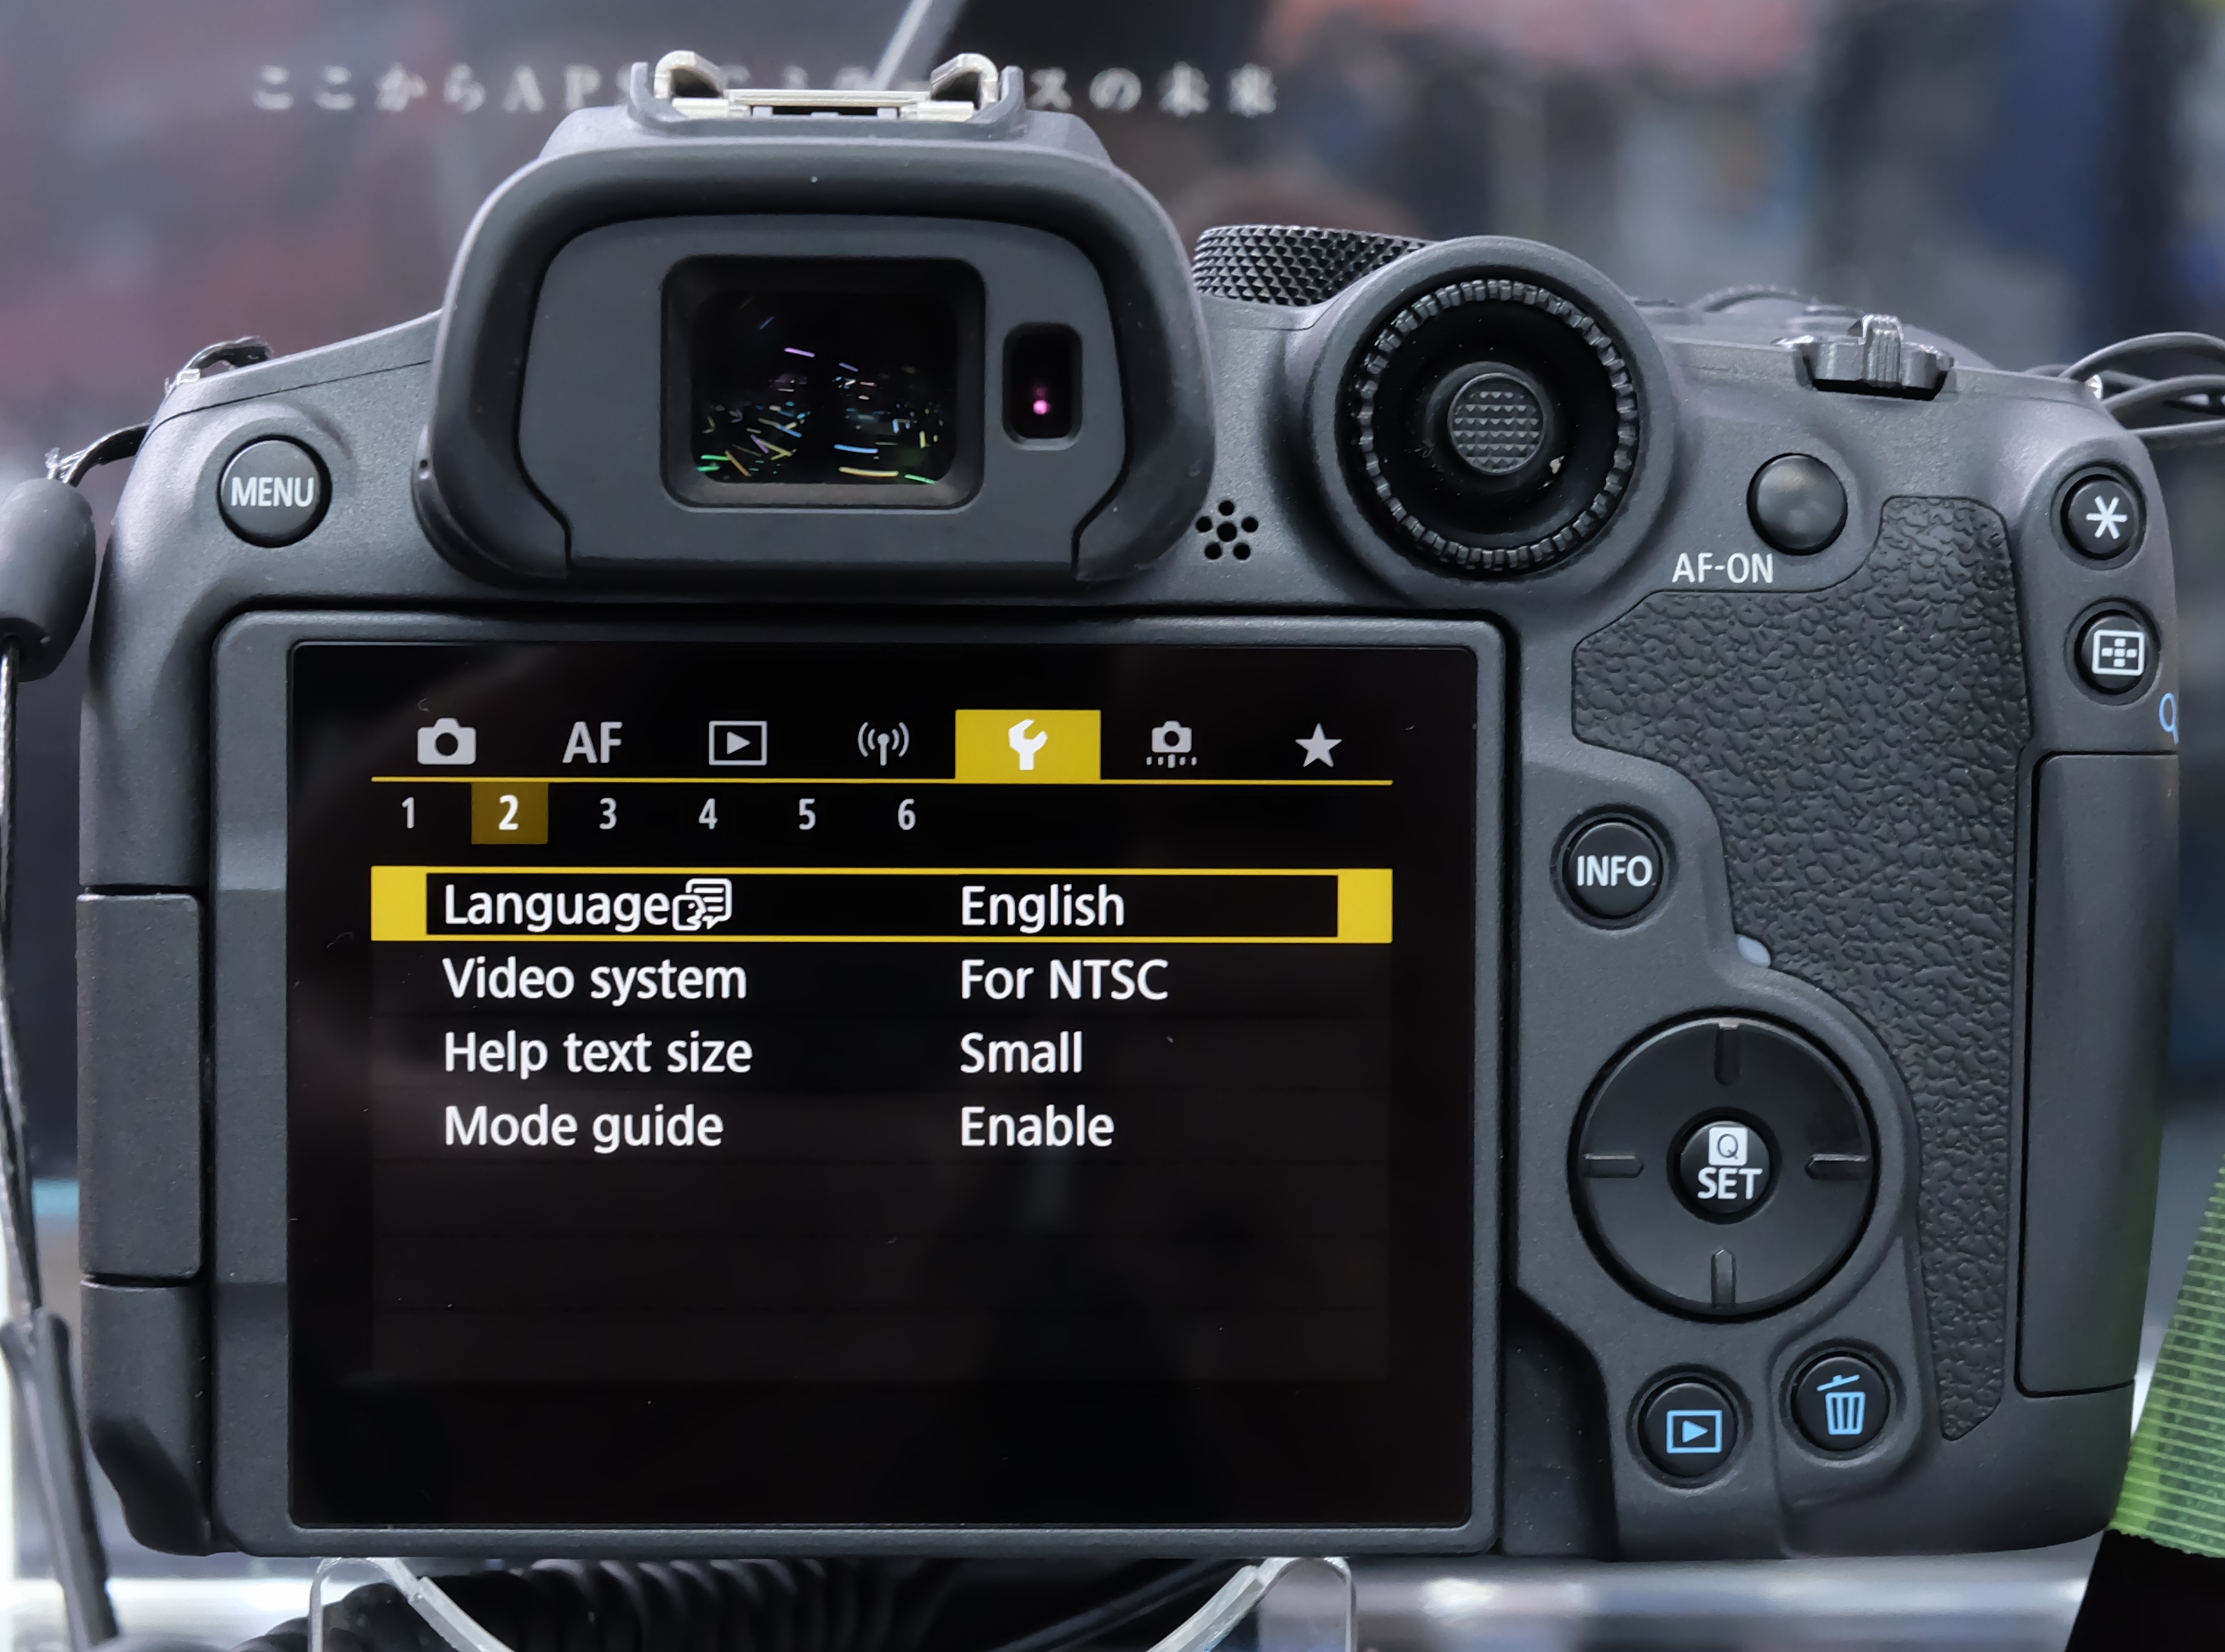 EOS R In 2022 for Photography 